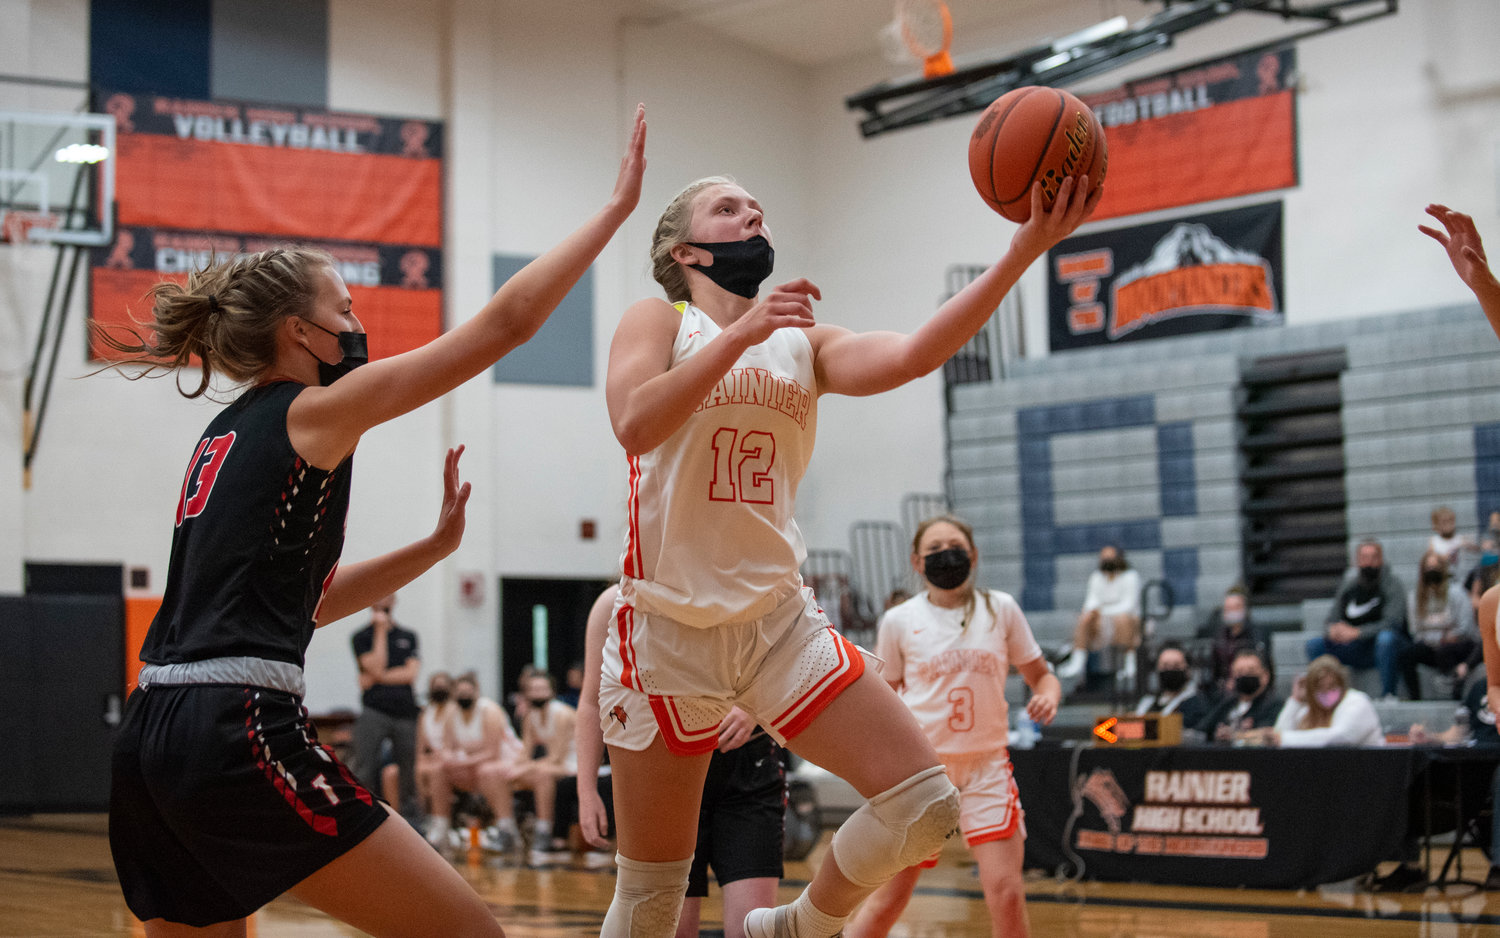 Rainier junior Kaeley Schultz (12) drives for a bucket against Tenino in the 2021 season opener Monday at home.